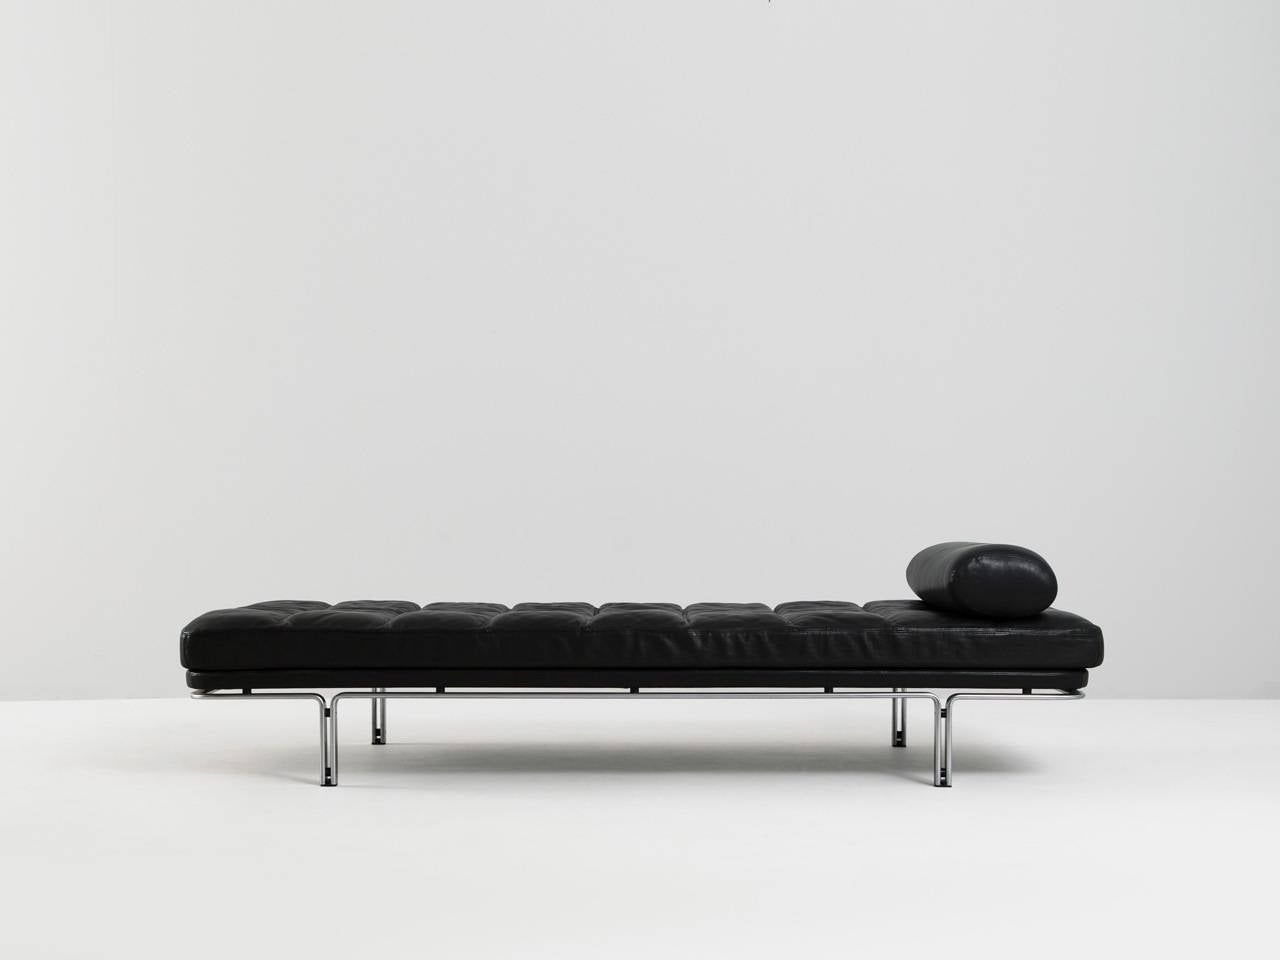 Horst Bruning for Kill International, daybed model 6915, in steel and leather, by Germany, 1960s

Well designed daybed (Model No. 6915) by Horst Bruning, produced by Kill International. The steel frame provides a stunning contrast with the